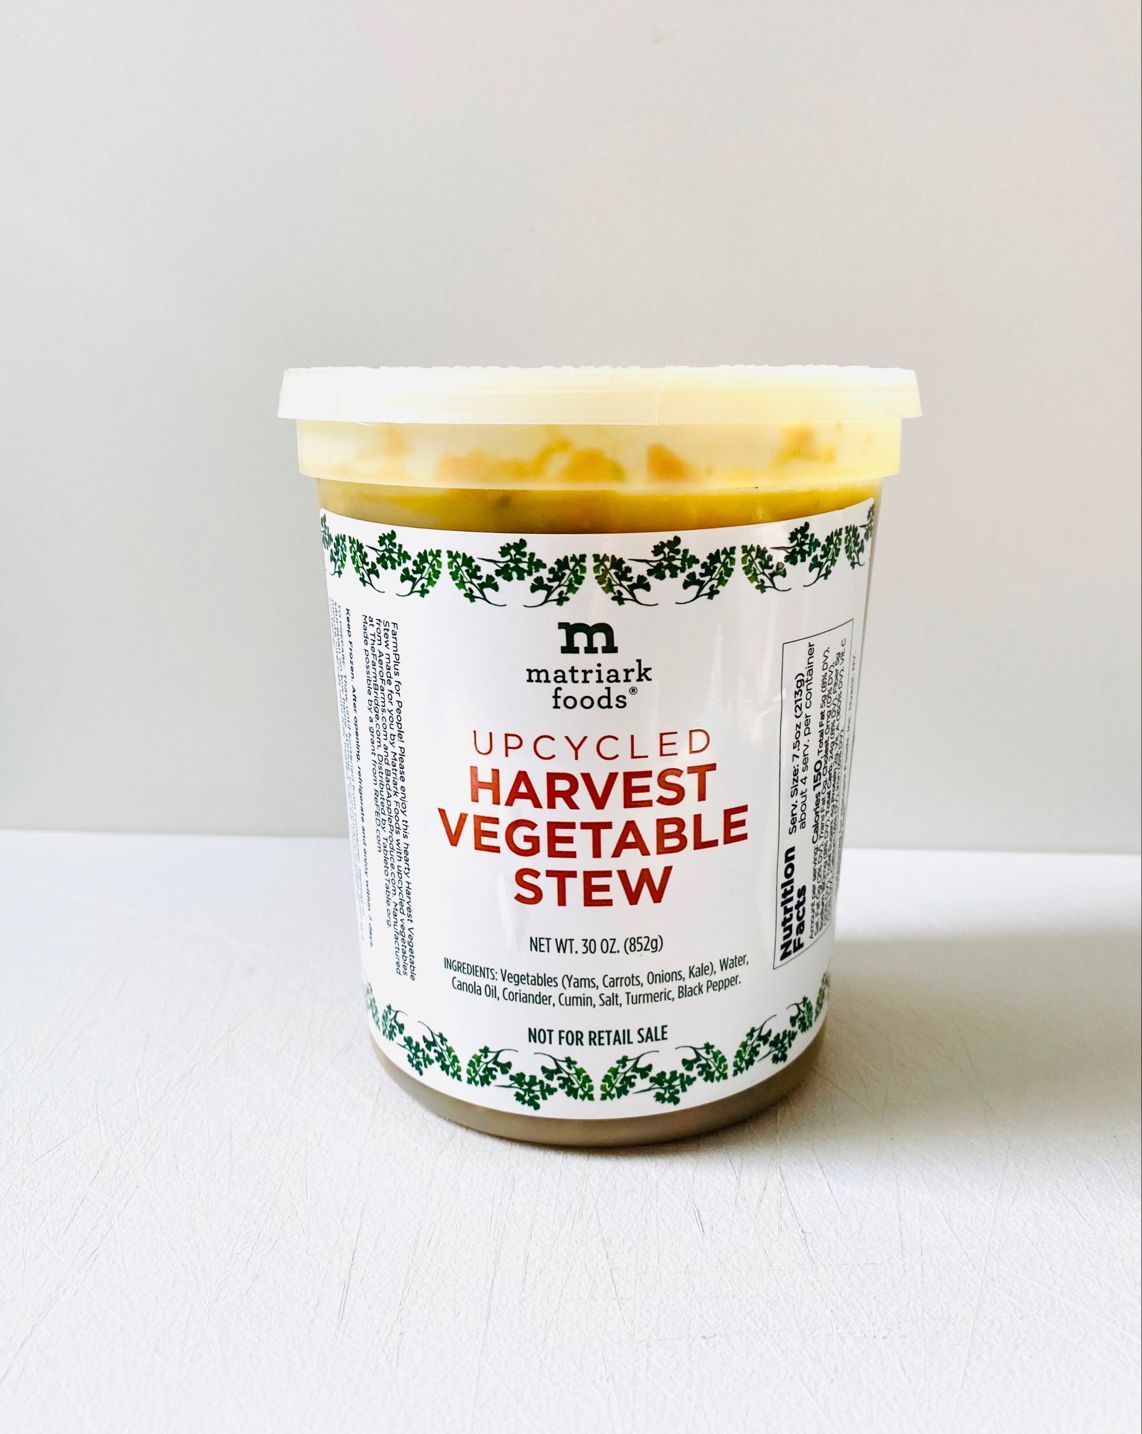 Matriark foods container of upcycled vegetable stew. October 2020